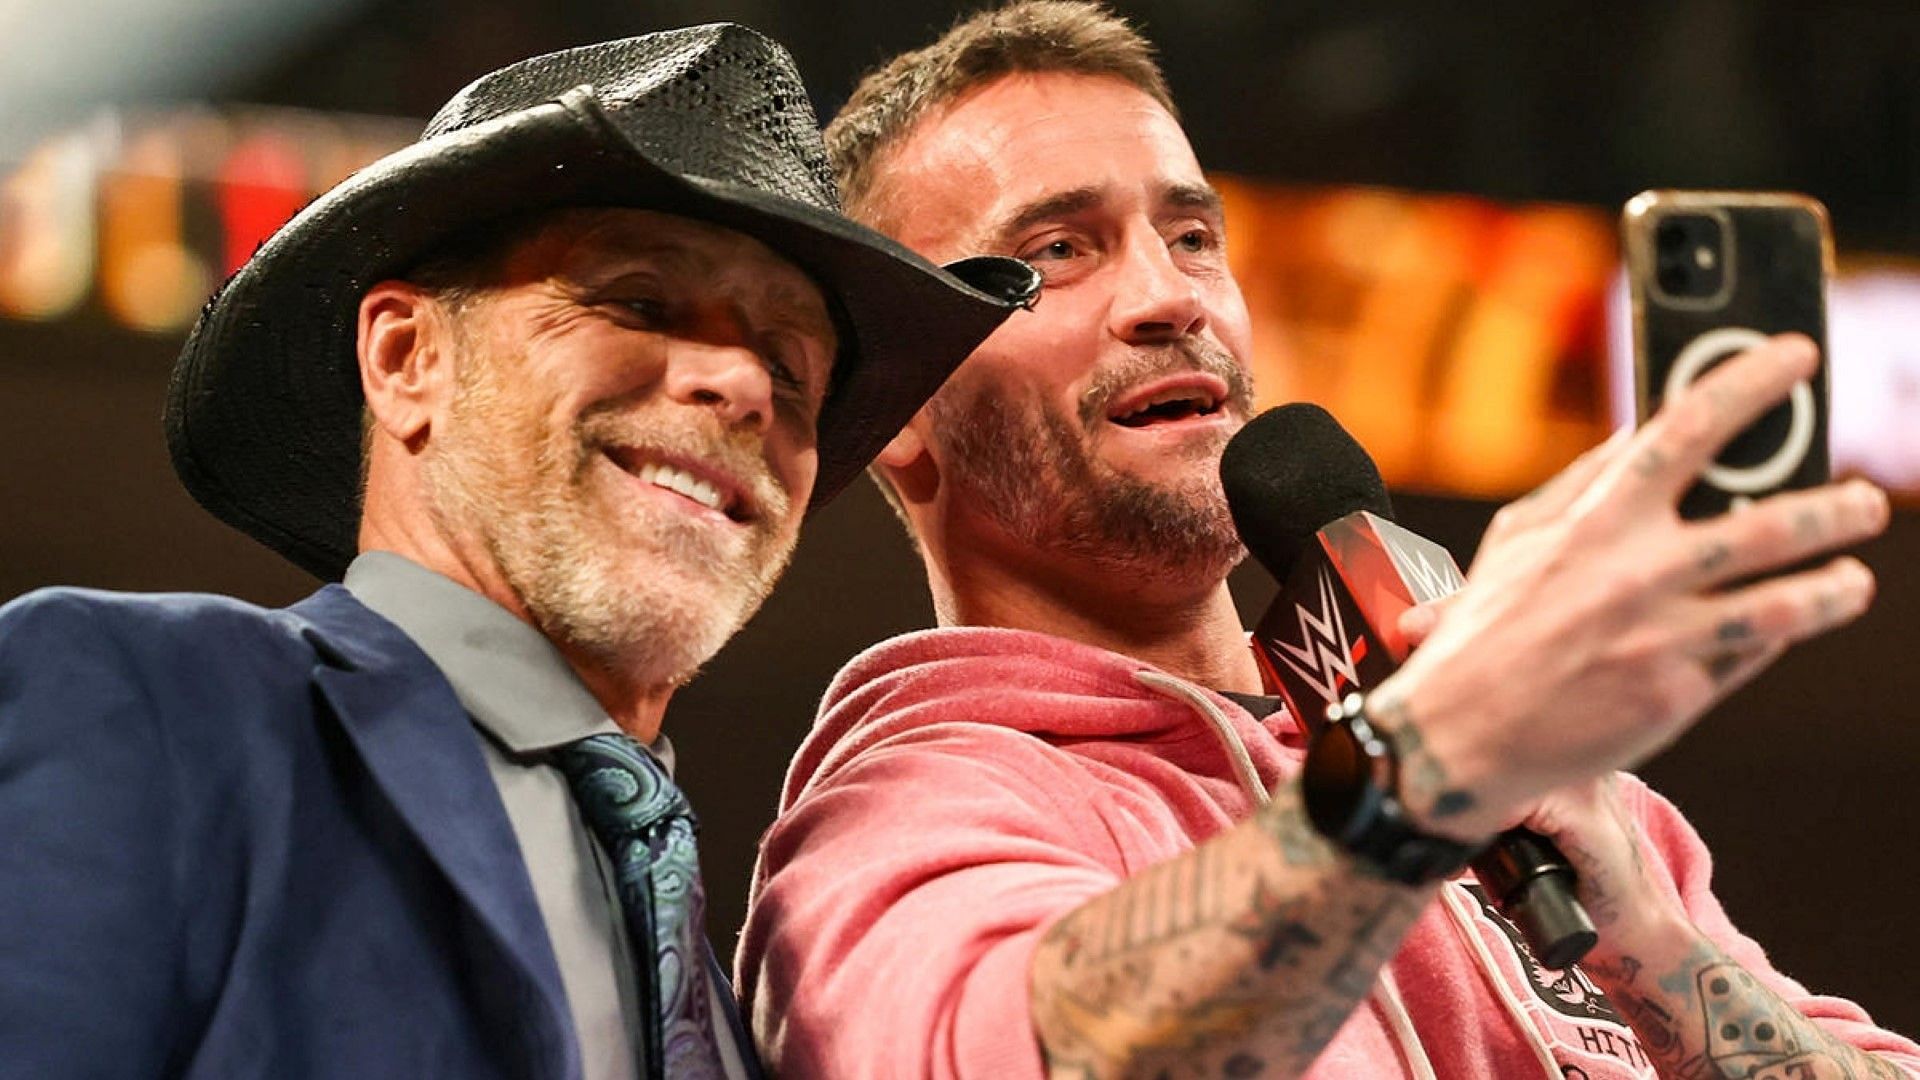 Shawn Michaels and CM Punk at WWE NXT Deadline